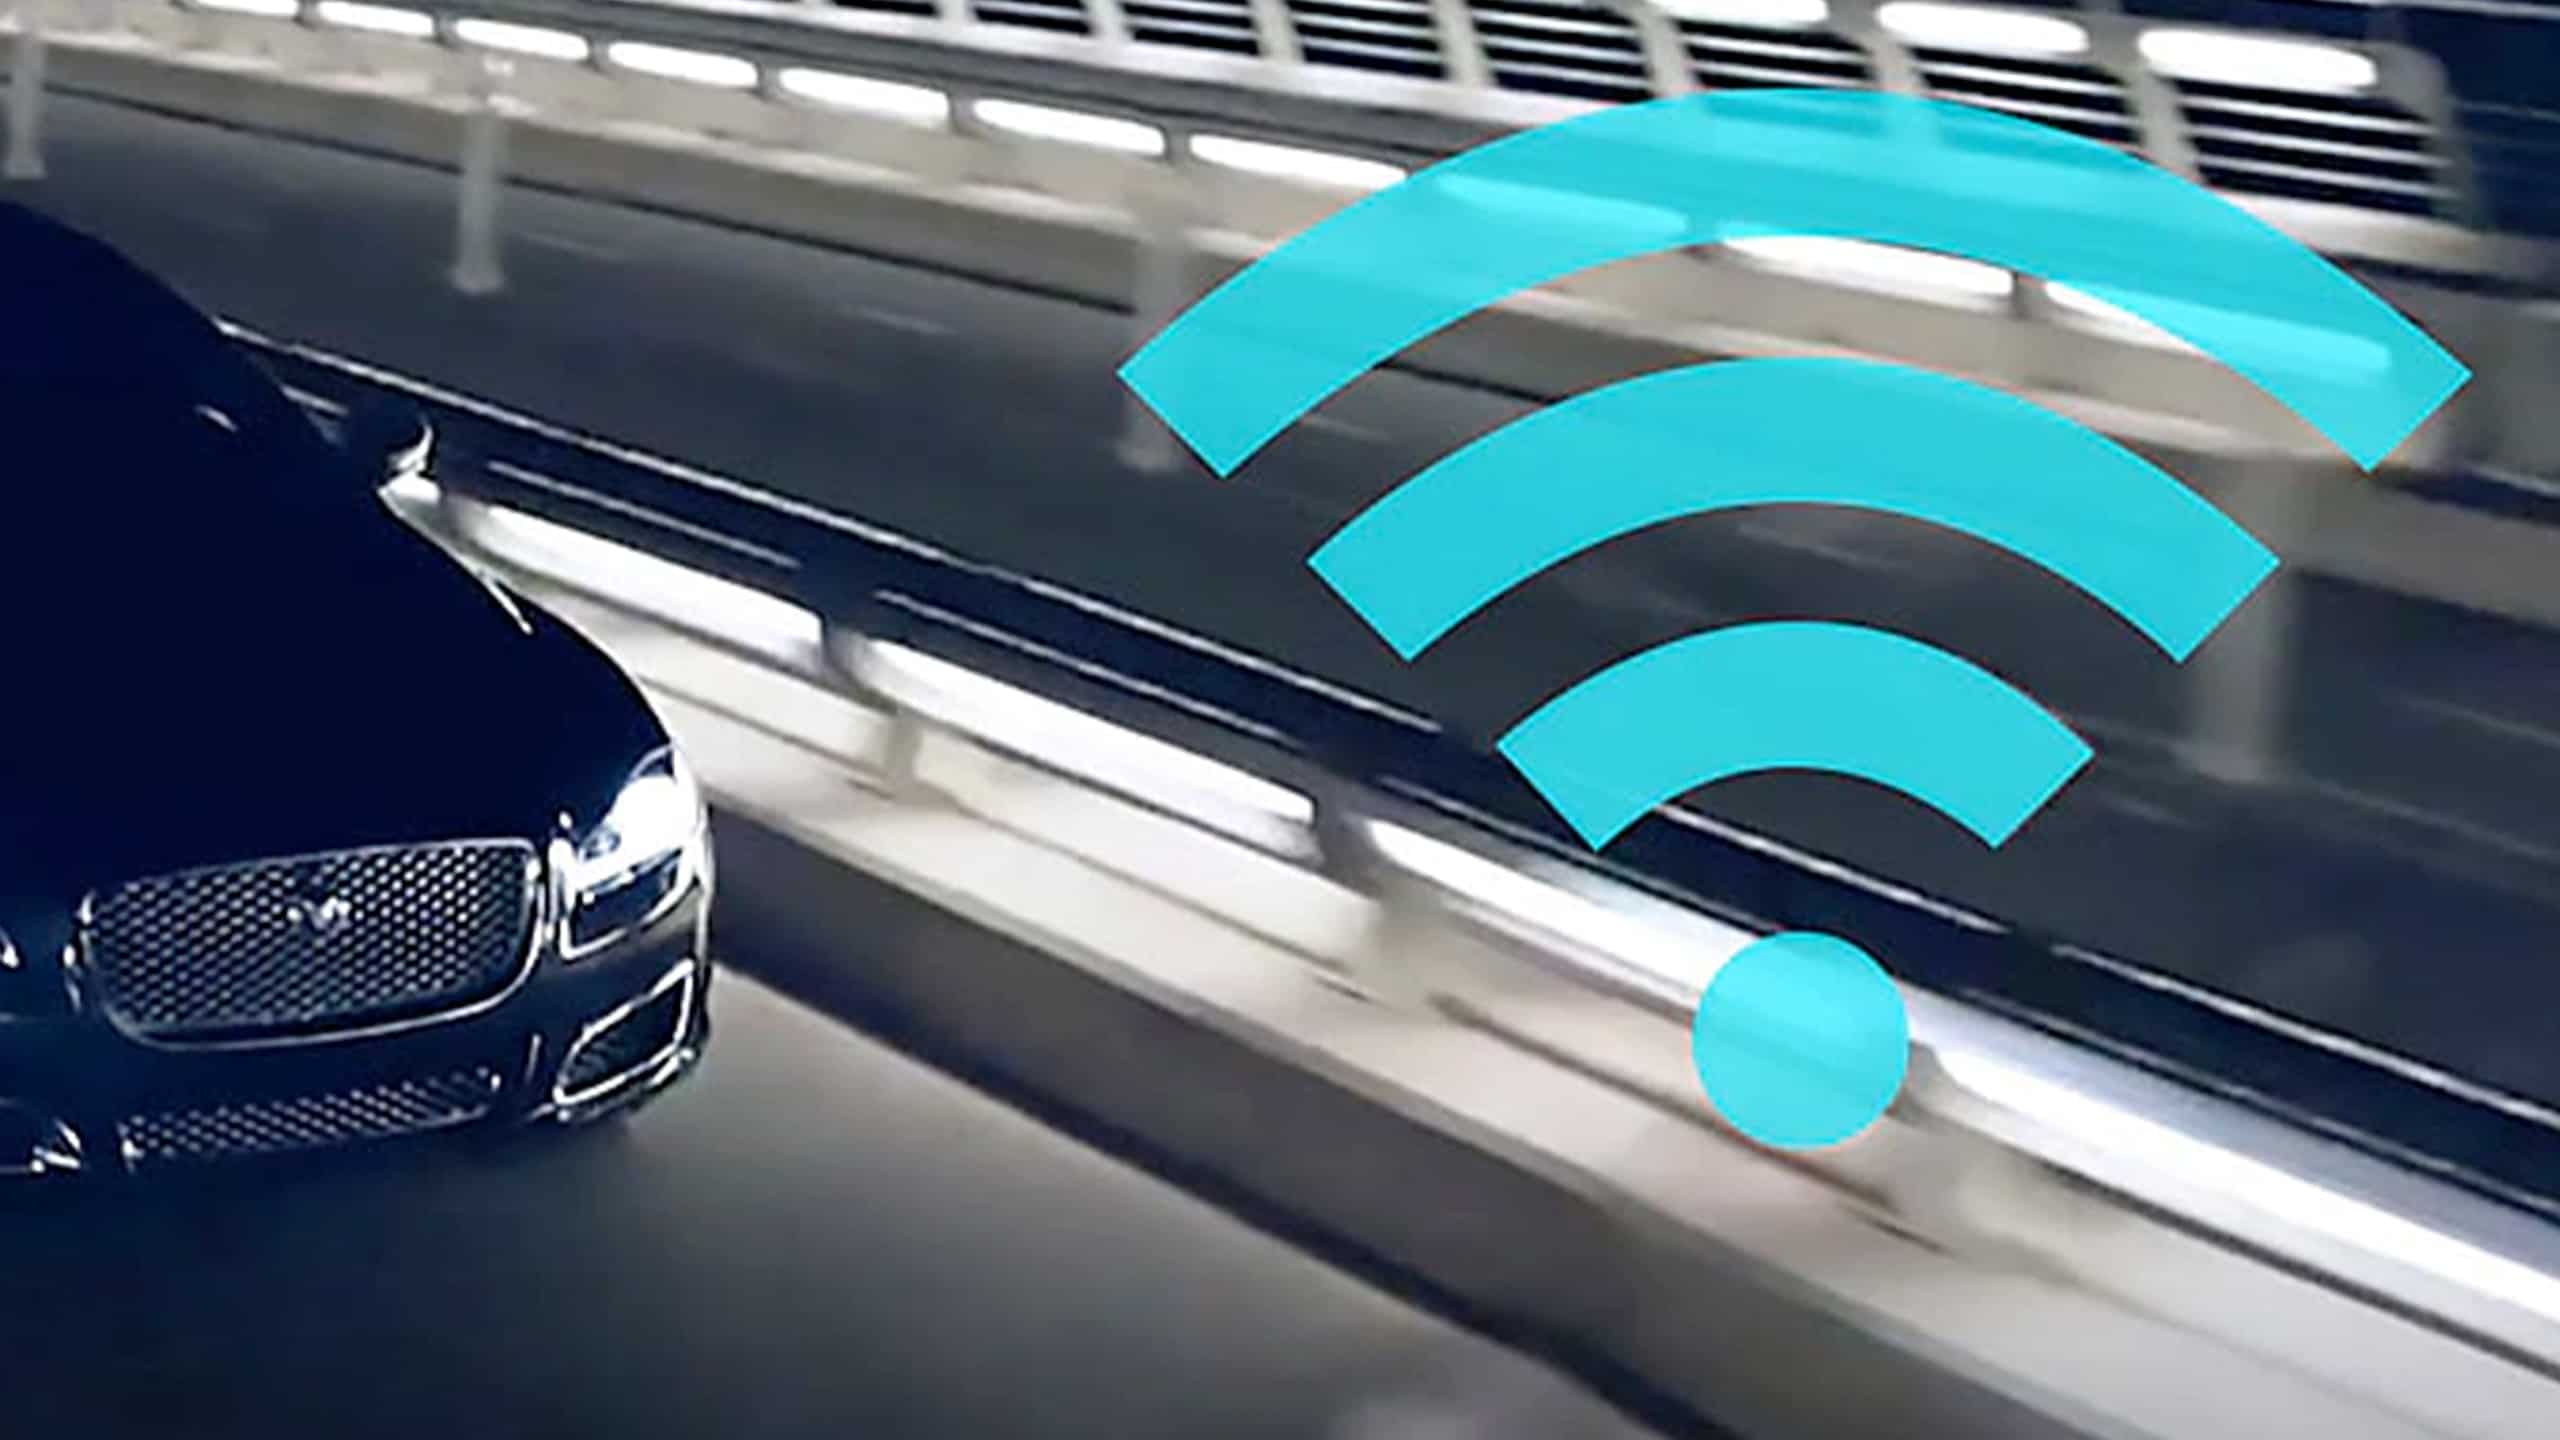 Jaguar XJ Running on a Road with Wifi Illustration